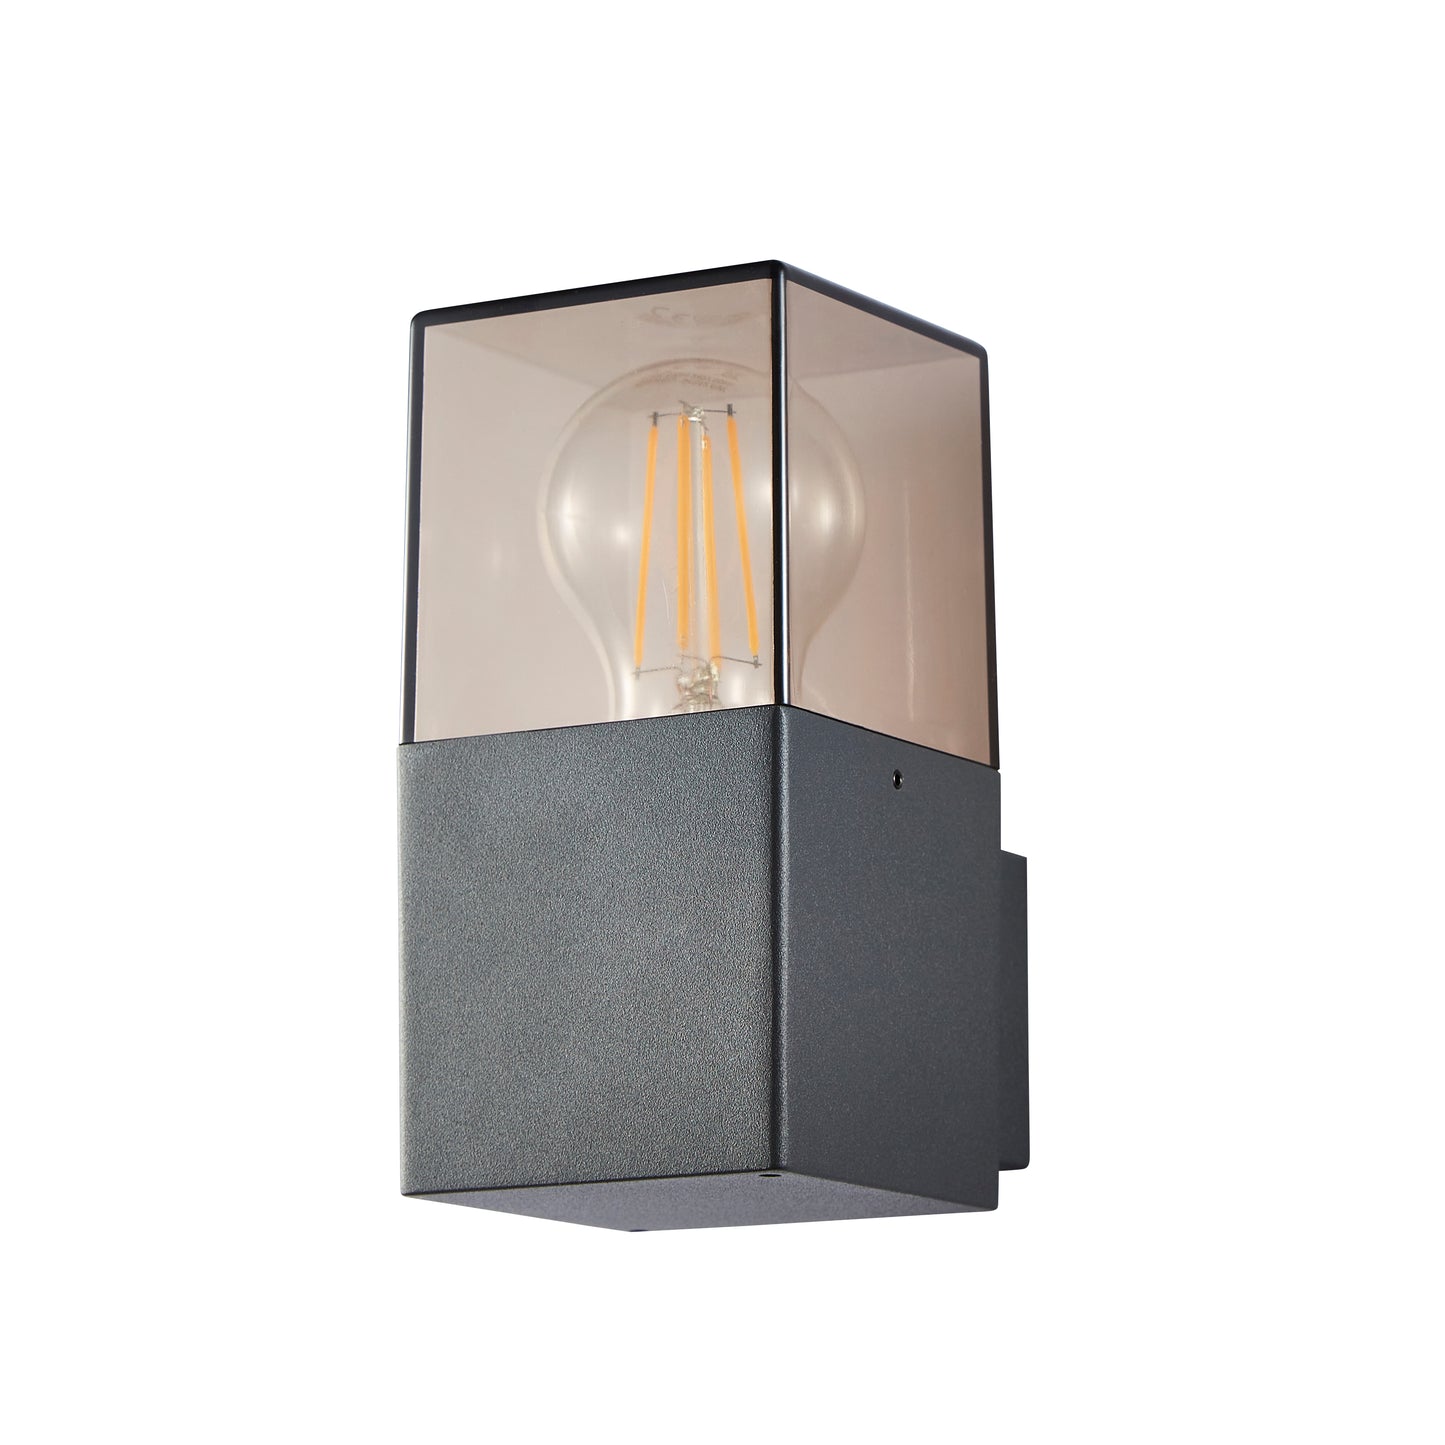 Our Amara grey anthracite outdoor wall light with smoked diffuser would look perfect in a modern or more traditional home design. Outside wall lights can provide atmospheric light in your garden, at the front door or on the terrace as well as a great security solution. It is designed for durability and longevity with its robust material producing a fully weatherproof and water resistant light fitting.